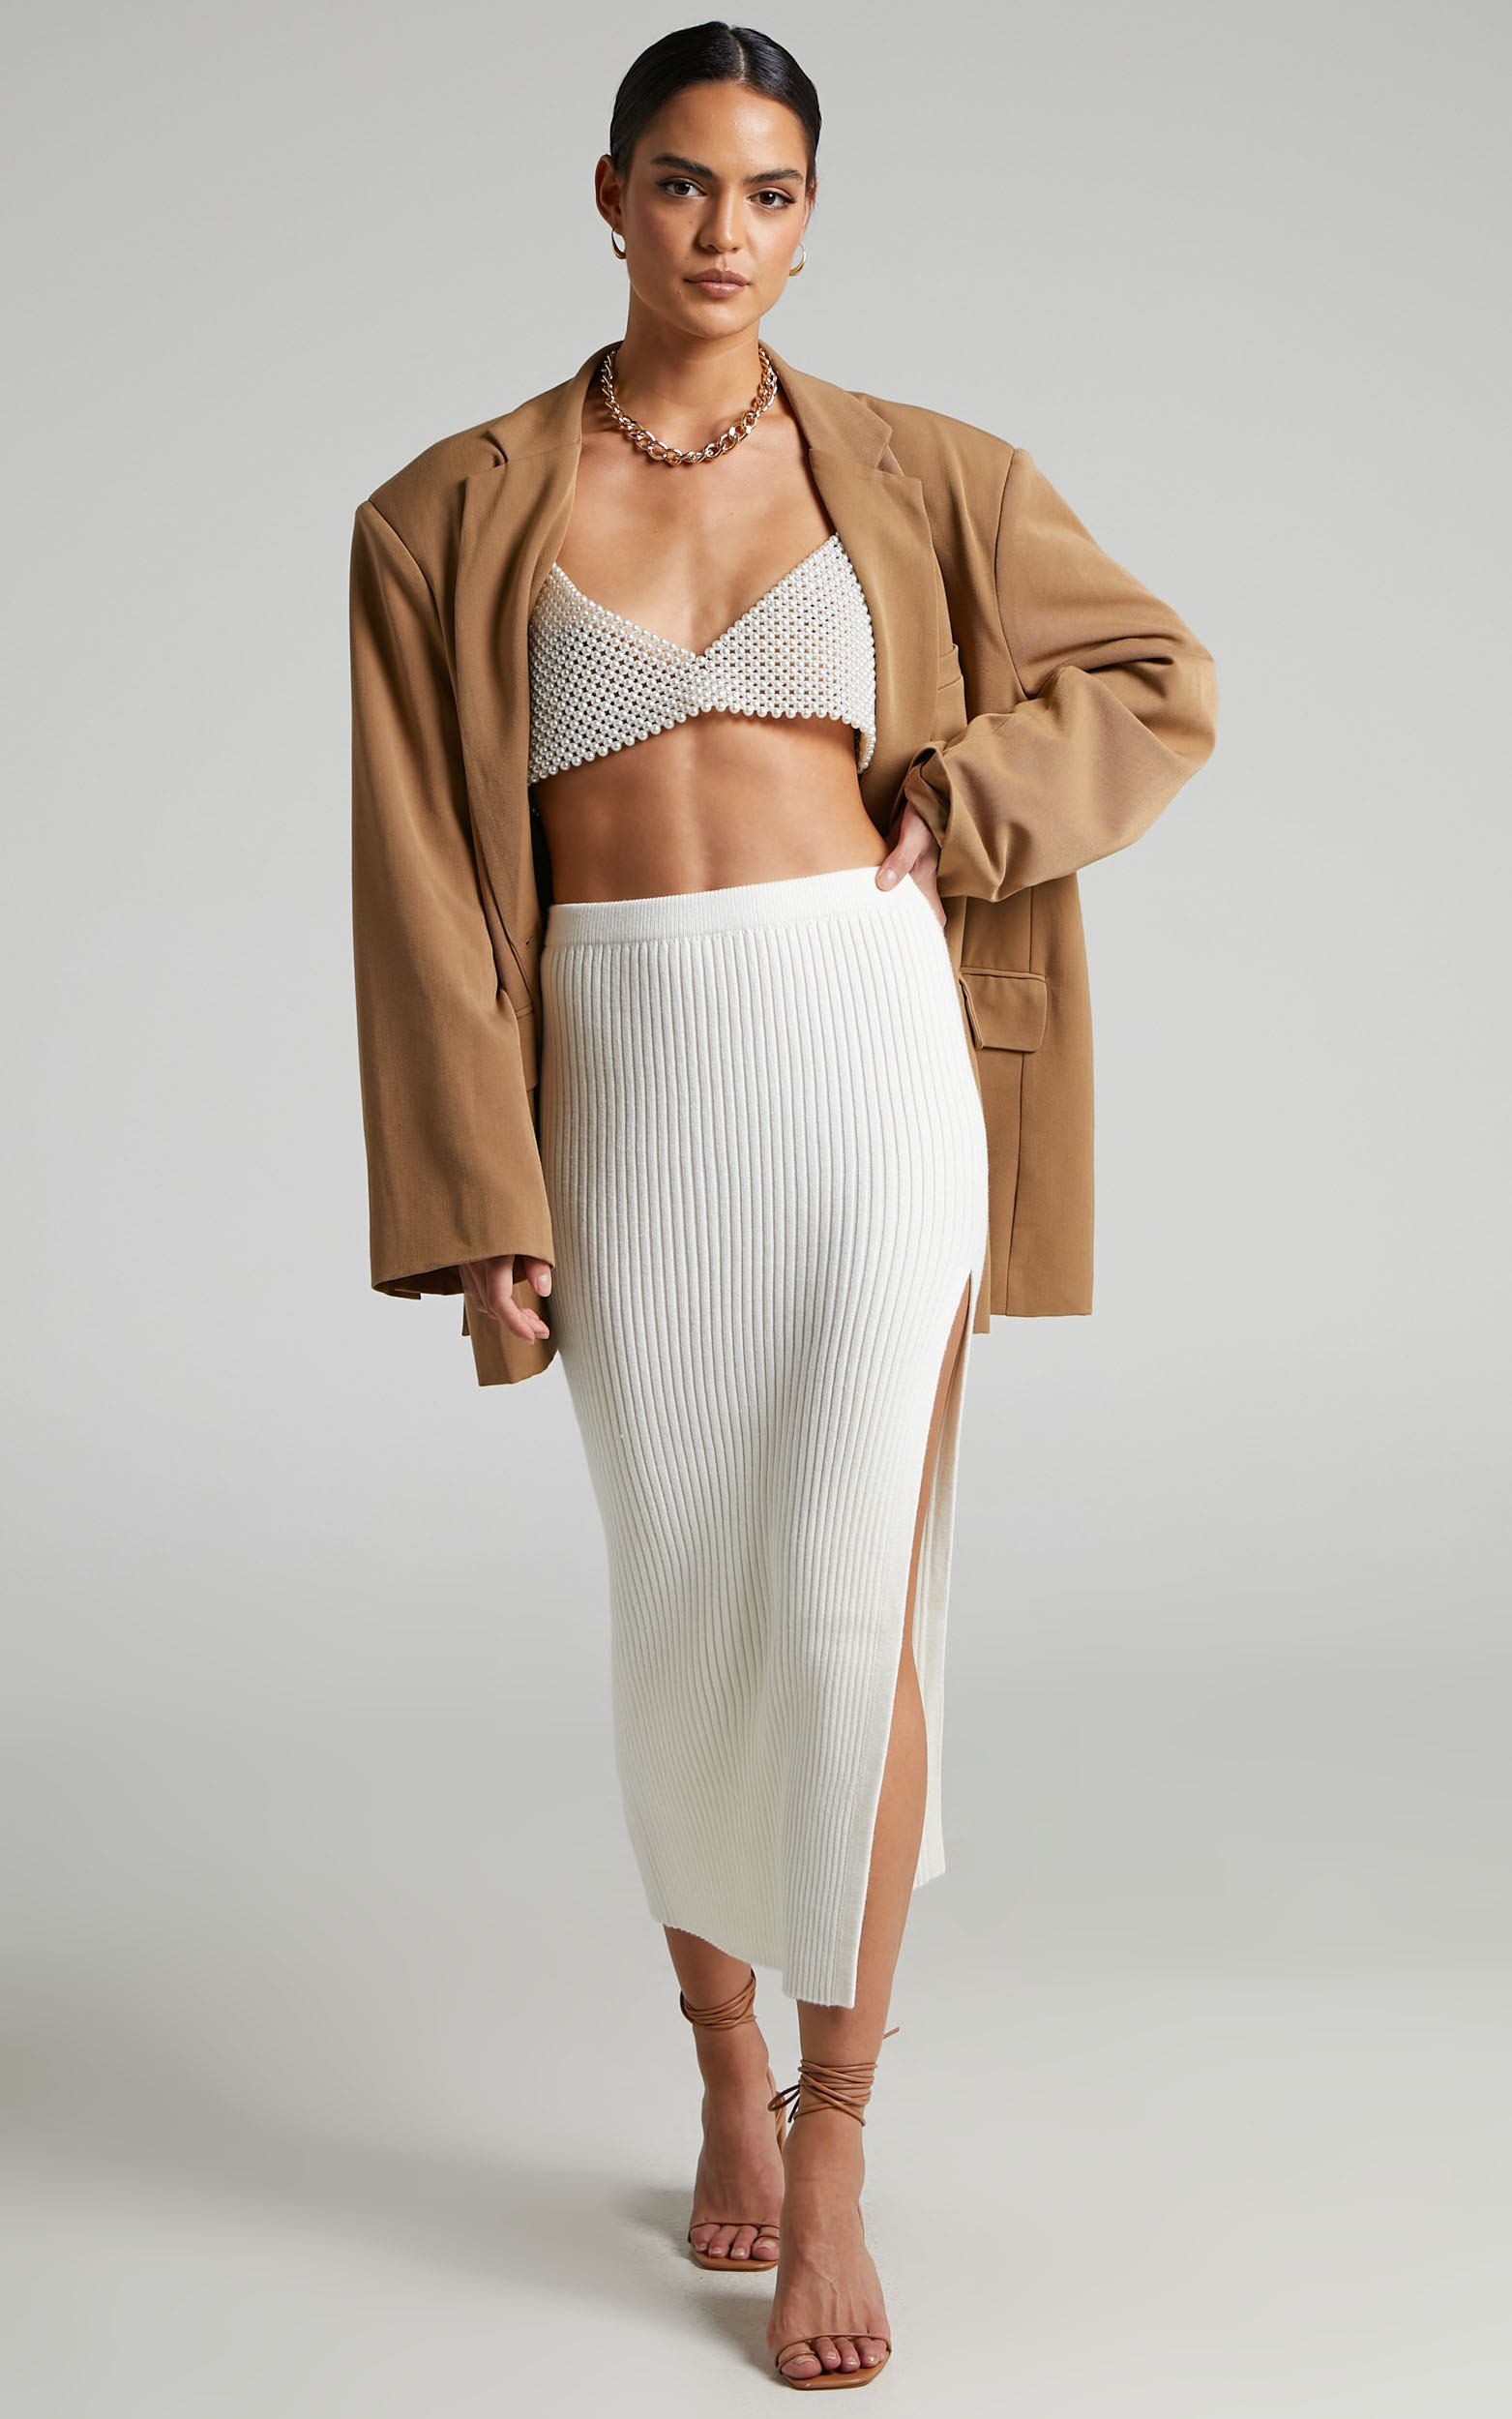 Andalucia Ribbed Side Split Midi Skirt in Cream - 04, CRE2, hi-res image number null